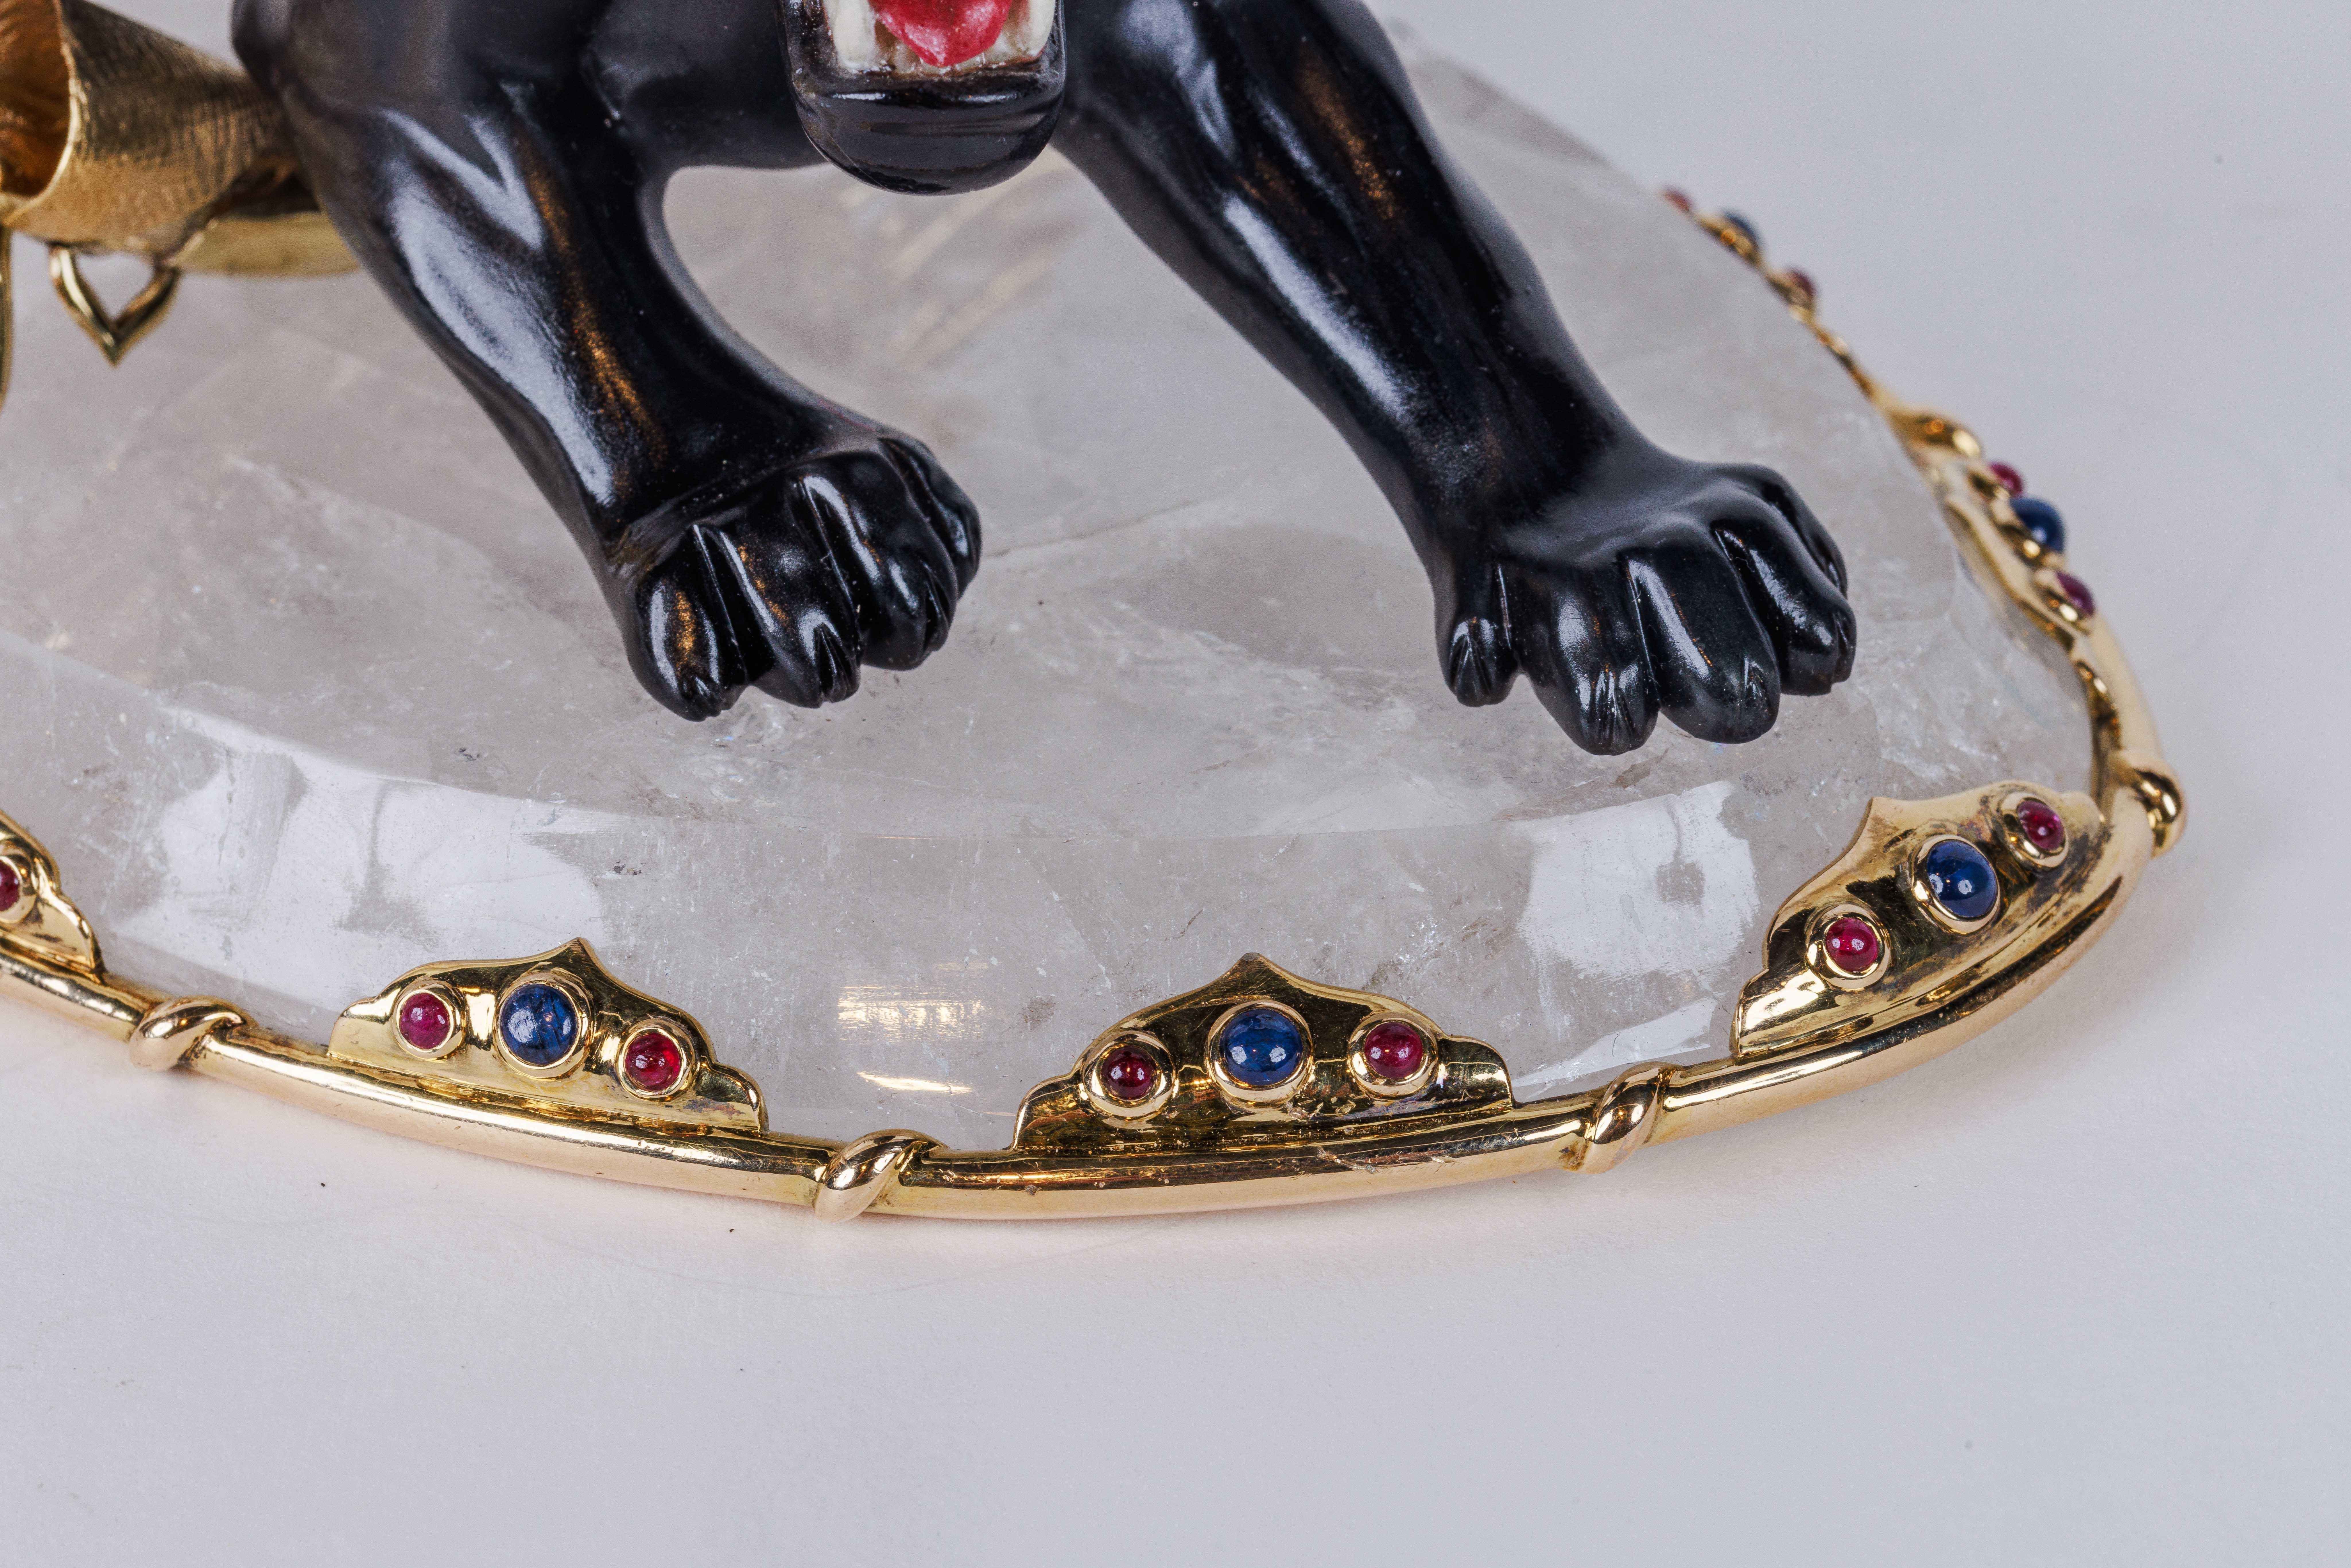 Alexandre Reza, Rare Obsidian, Silver-Gilt, and Rock Crystal Circus Panther For Sale 4